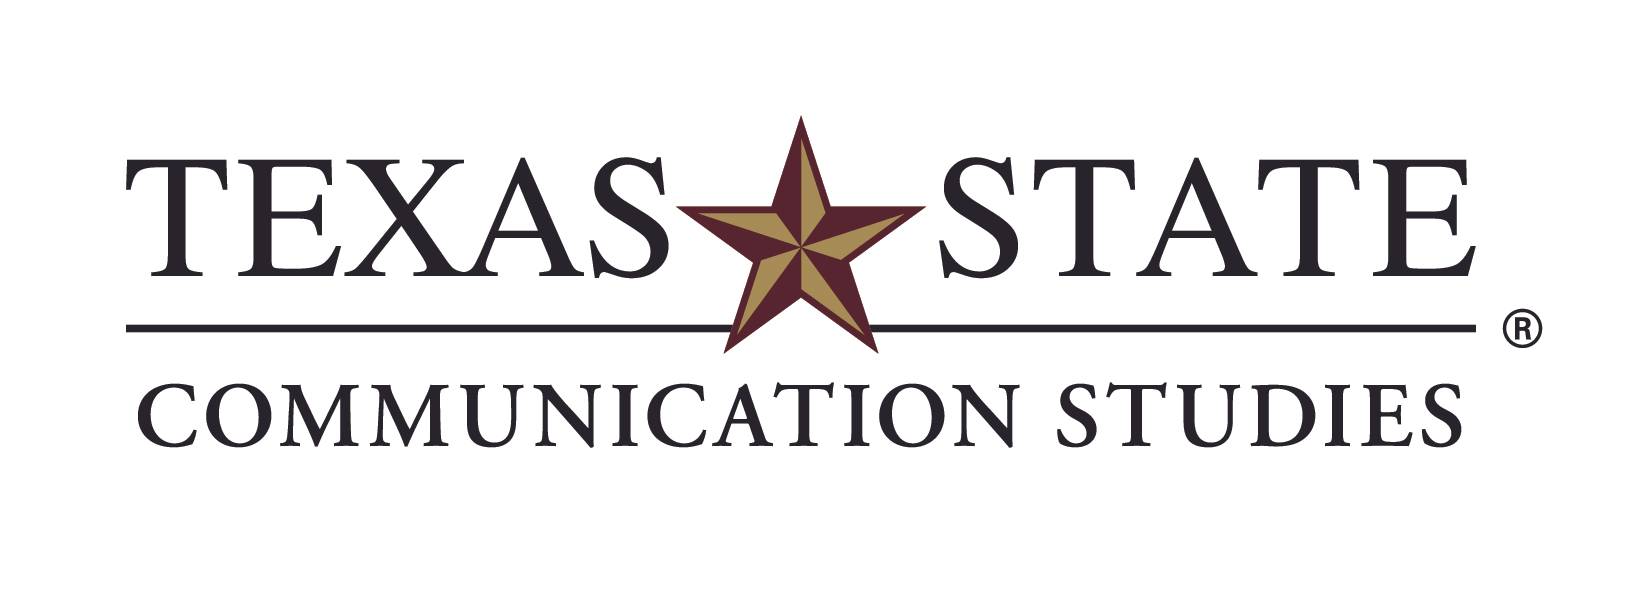 Black Texas State Communication Studies wording with star in the middle